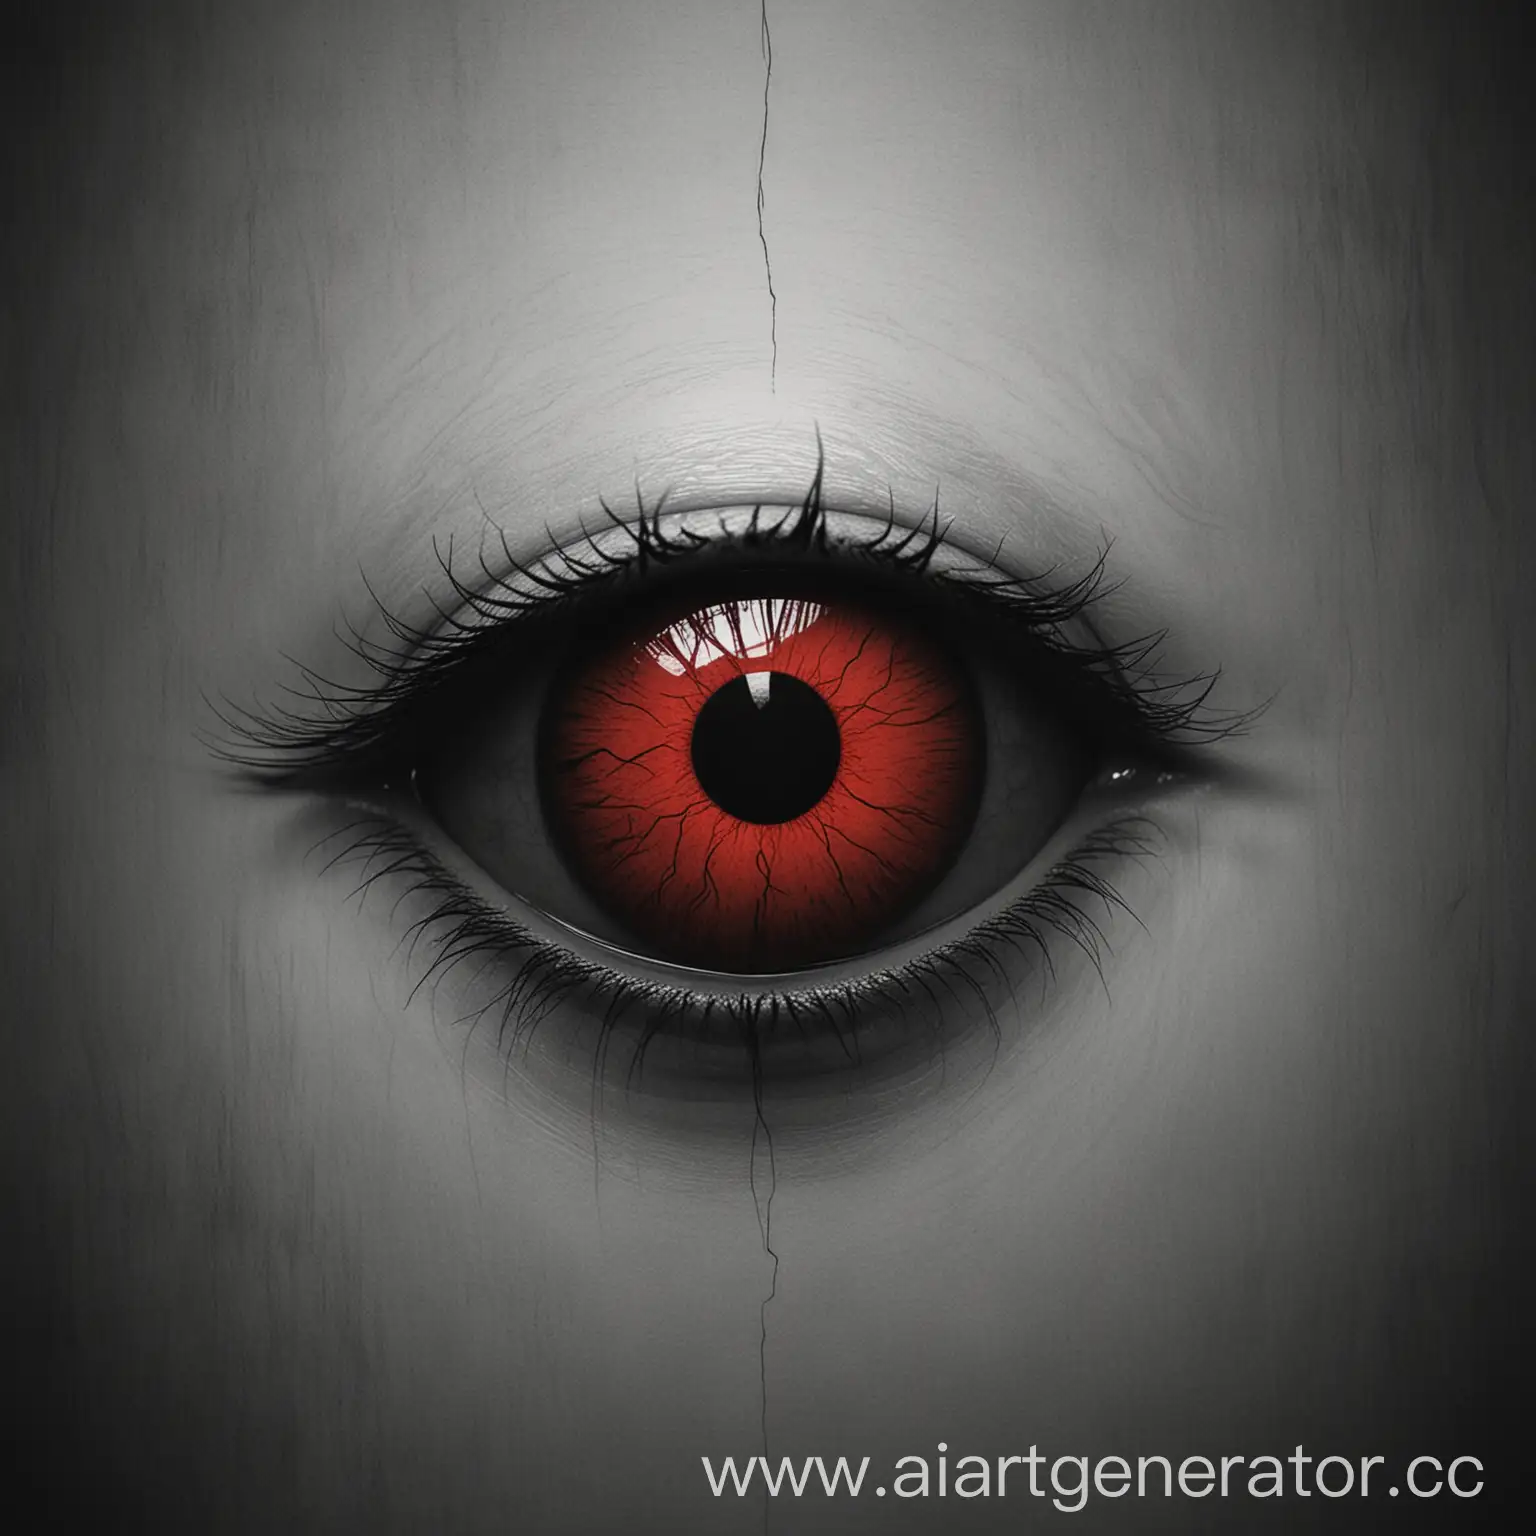 Minimalist-Black-and-White-Cover-with-Red-Demonic-Eye-in-Soft-Tones